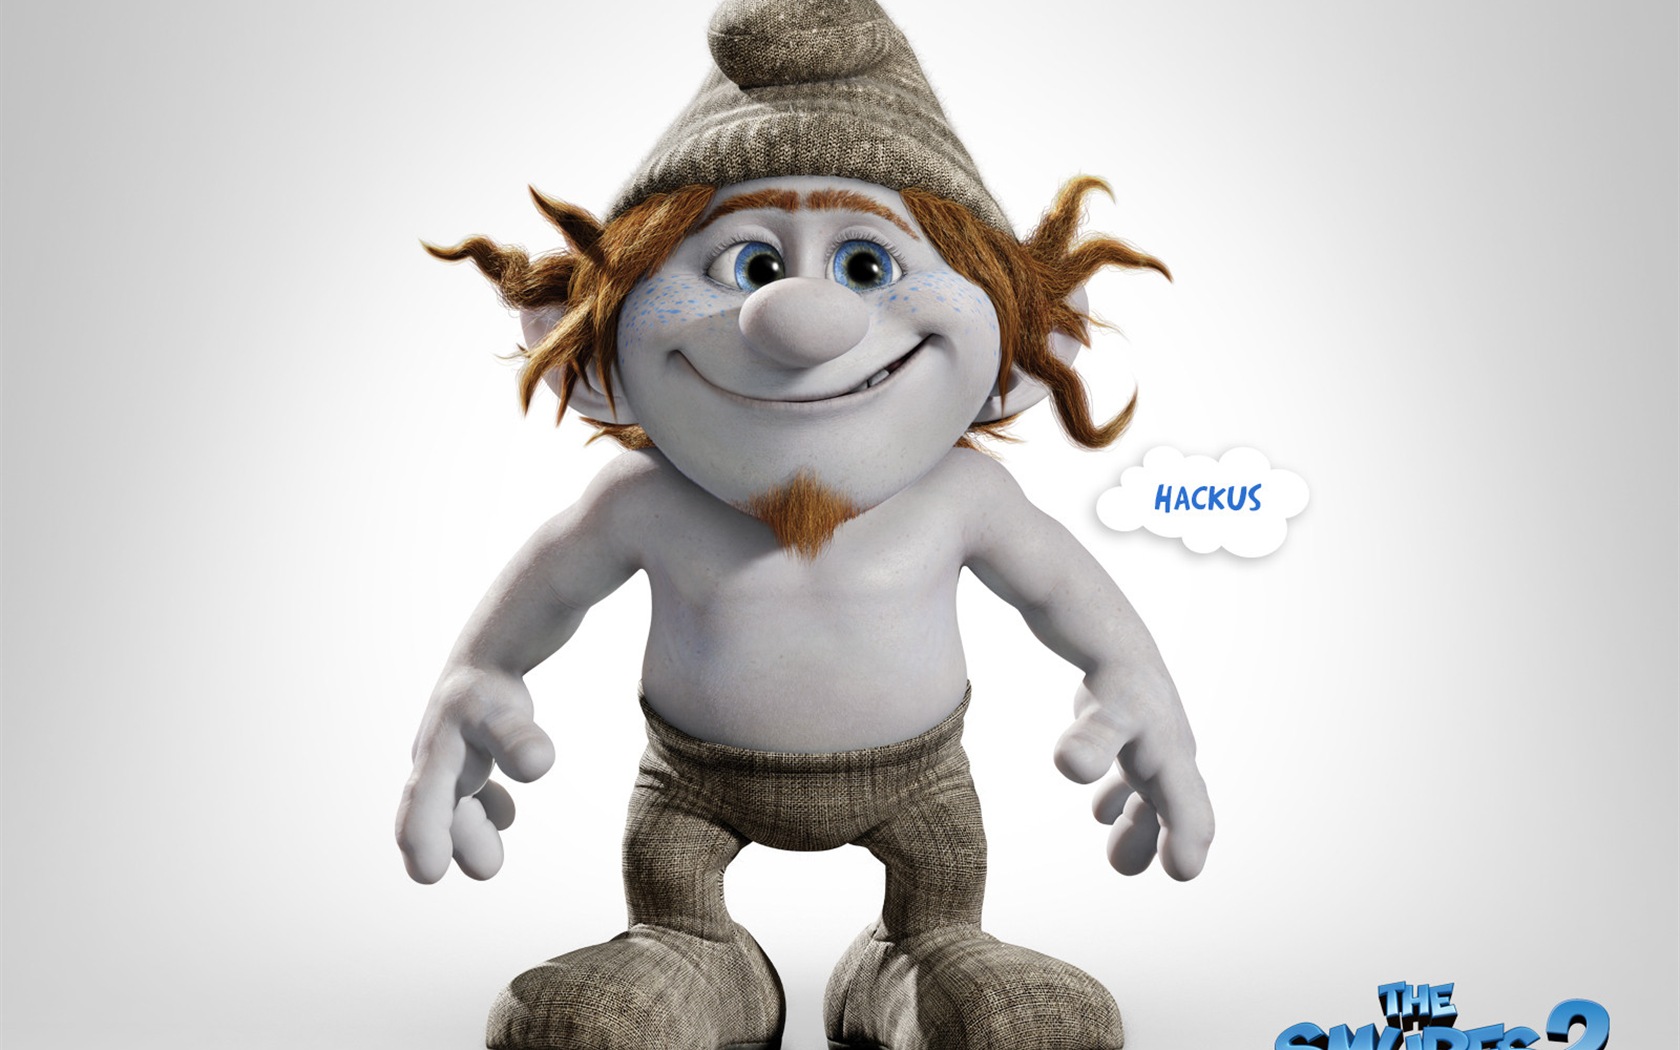 The Smurfs 2 HD movie wallpapers #9 - 1680x1050